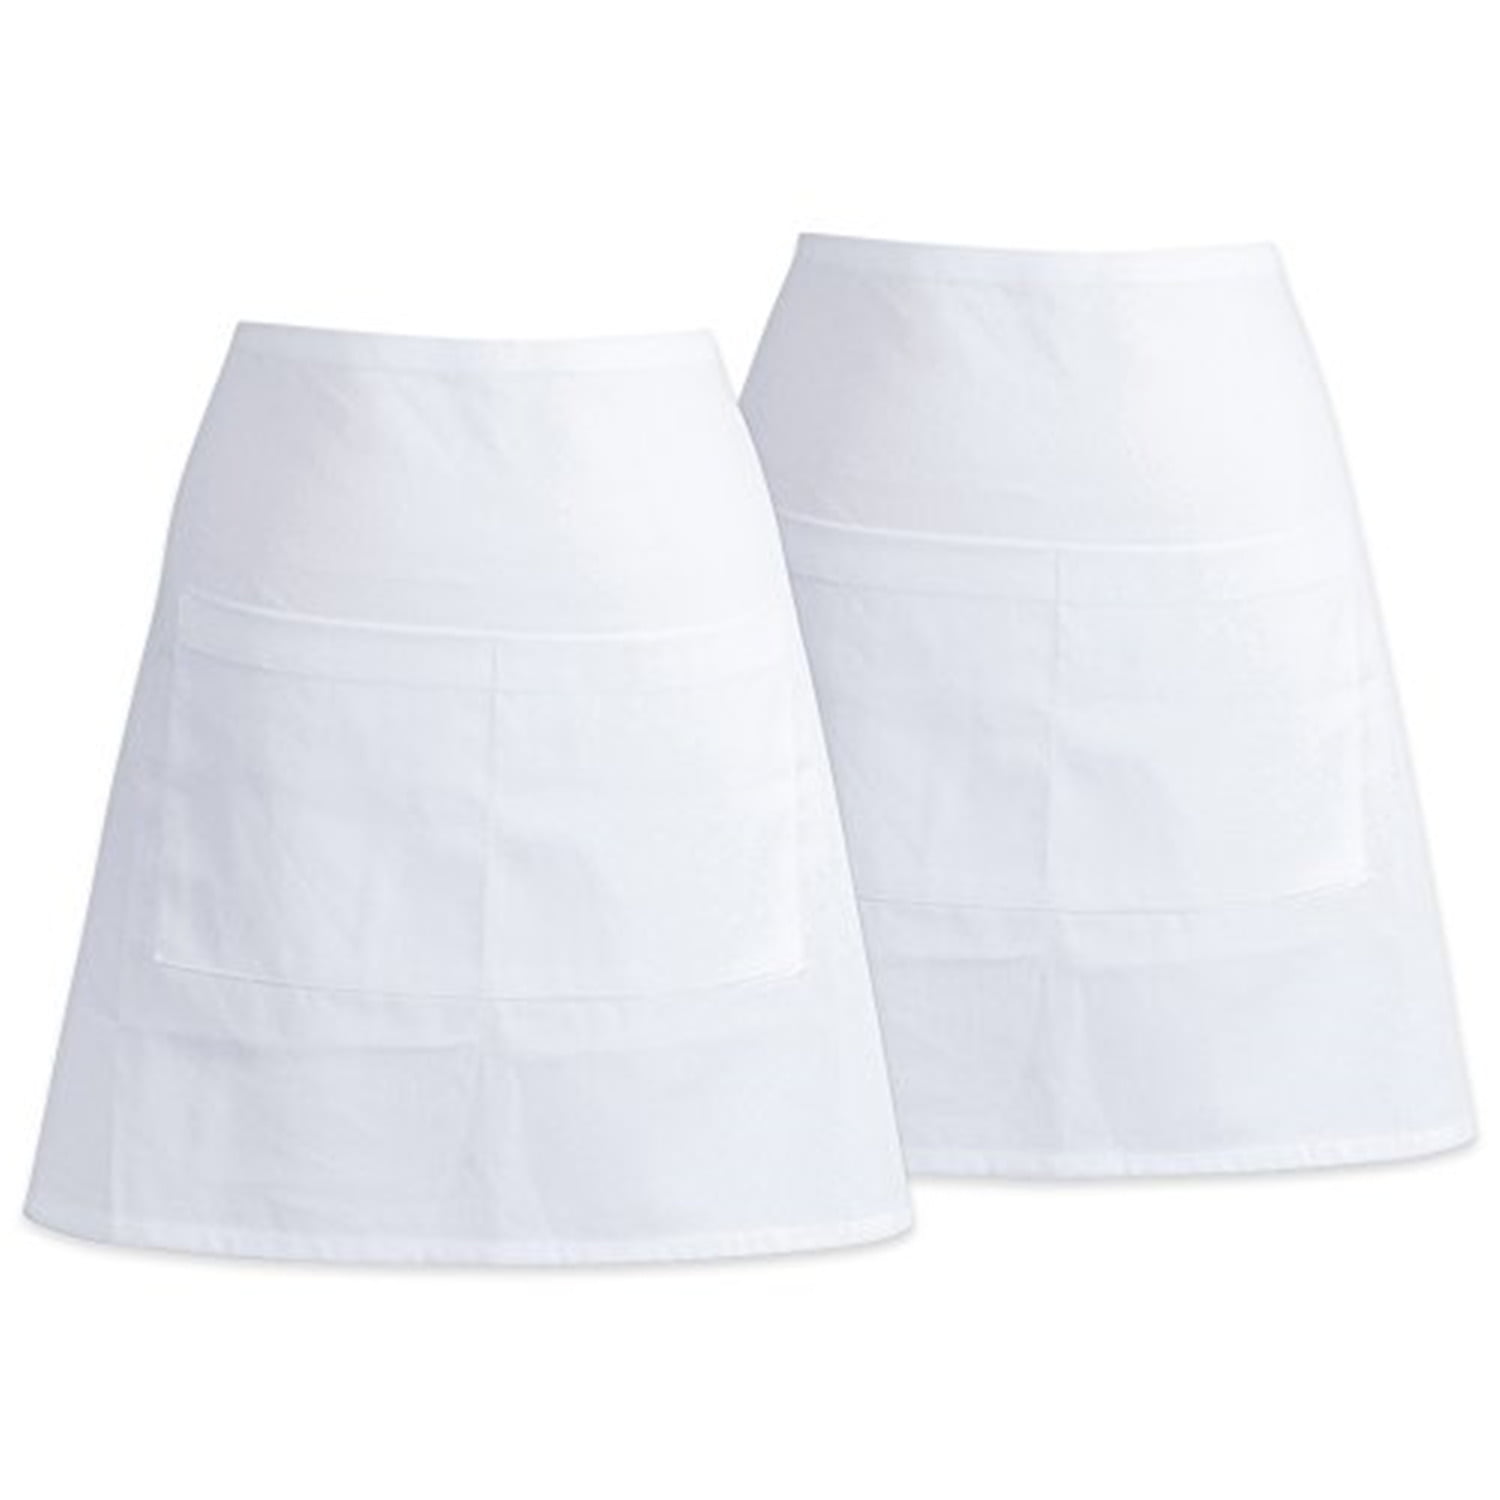 EIGHT used ex-rental white waist aprons with pocket 